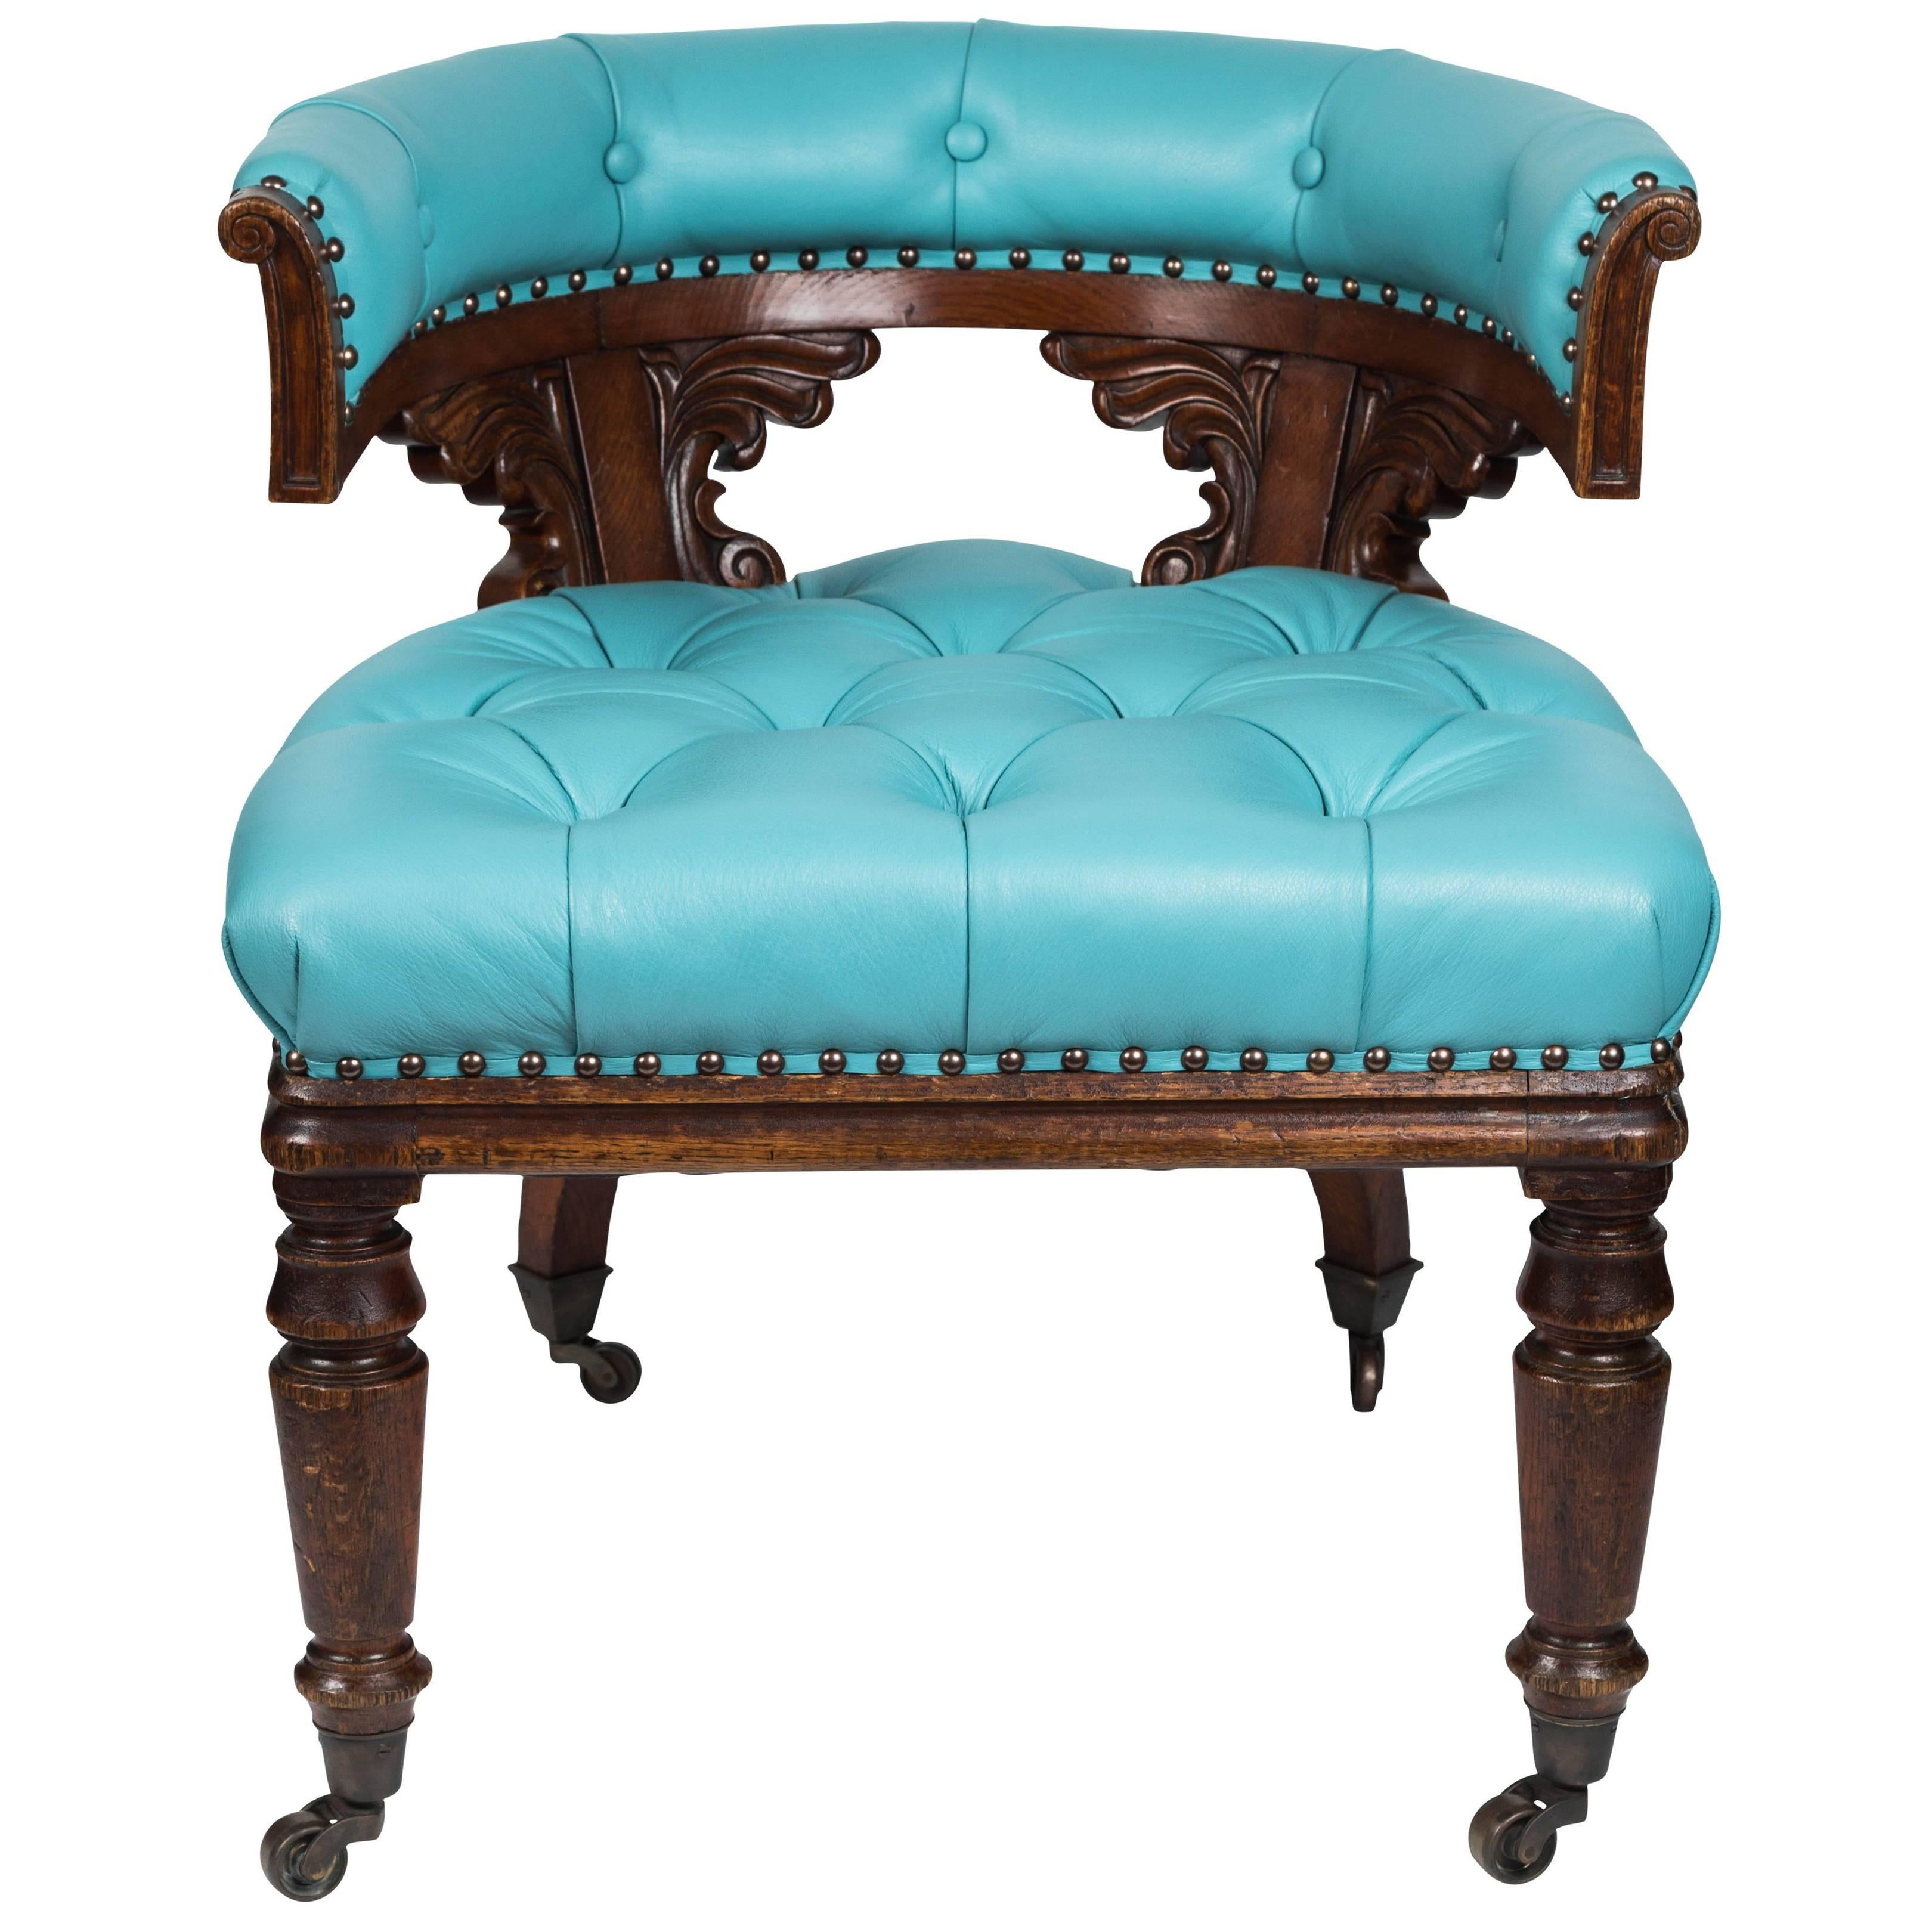 Antique William IV Chair in Mahogany and Turquoise Leather